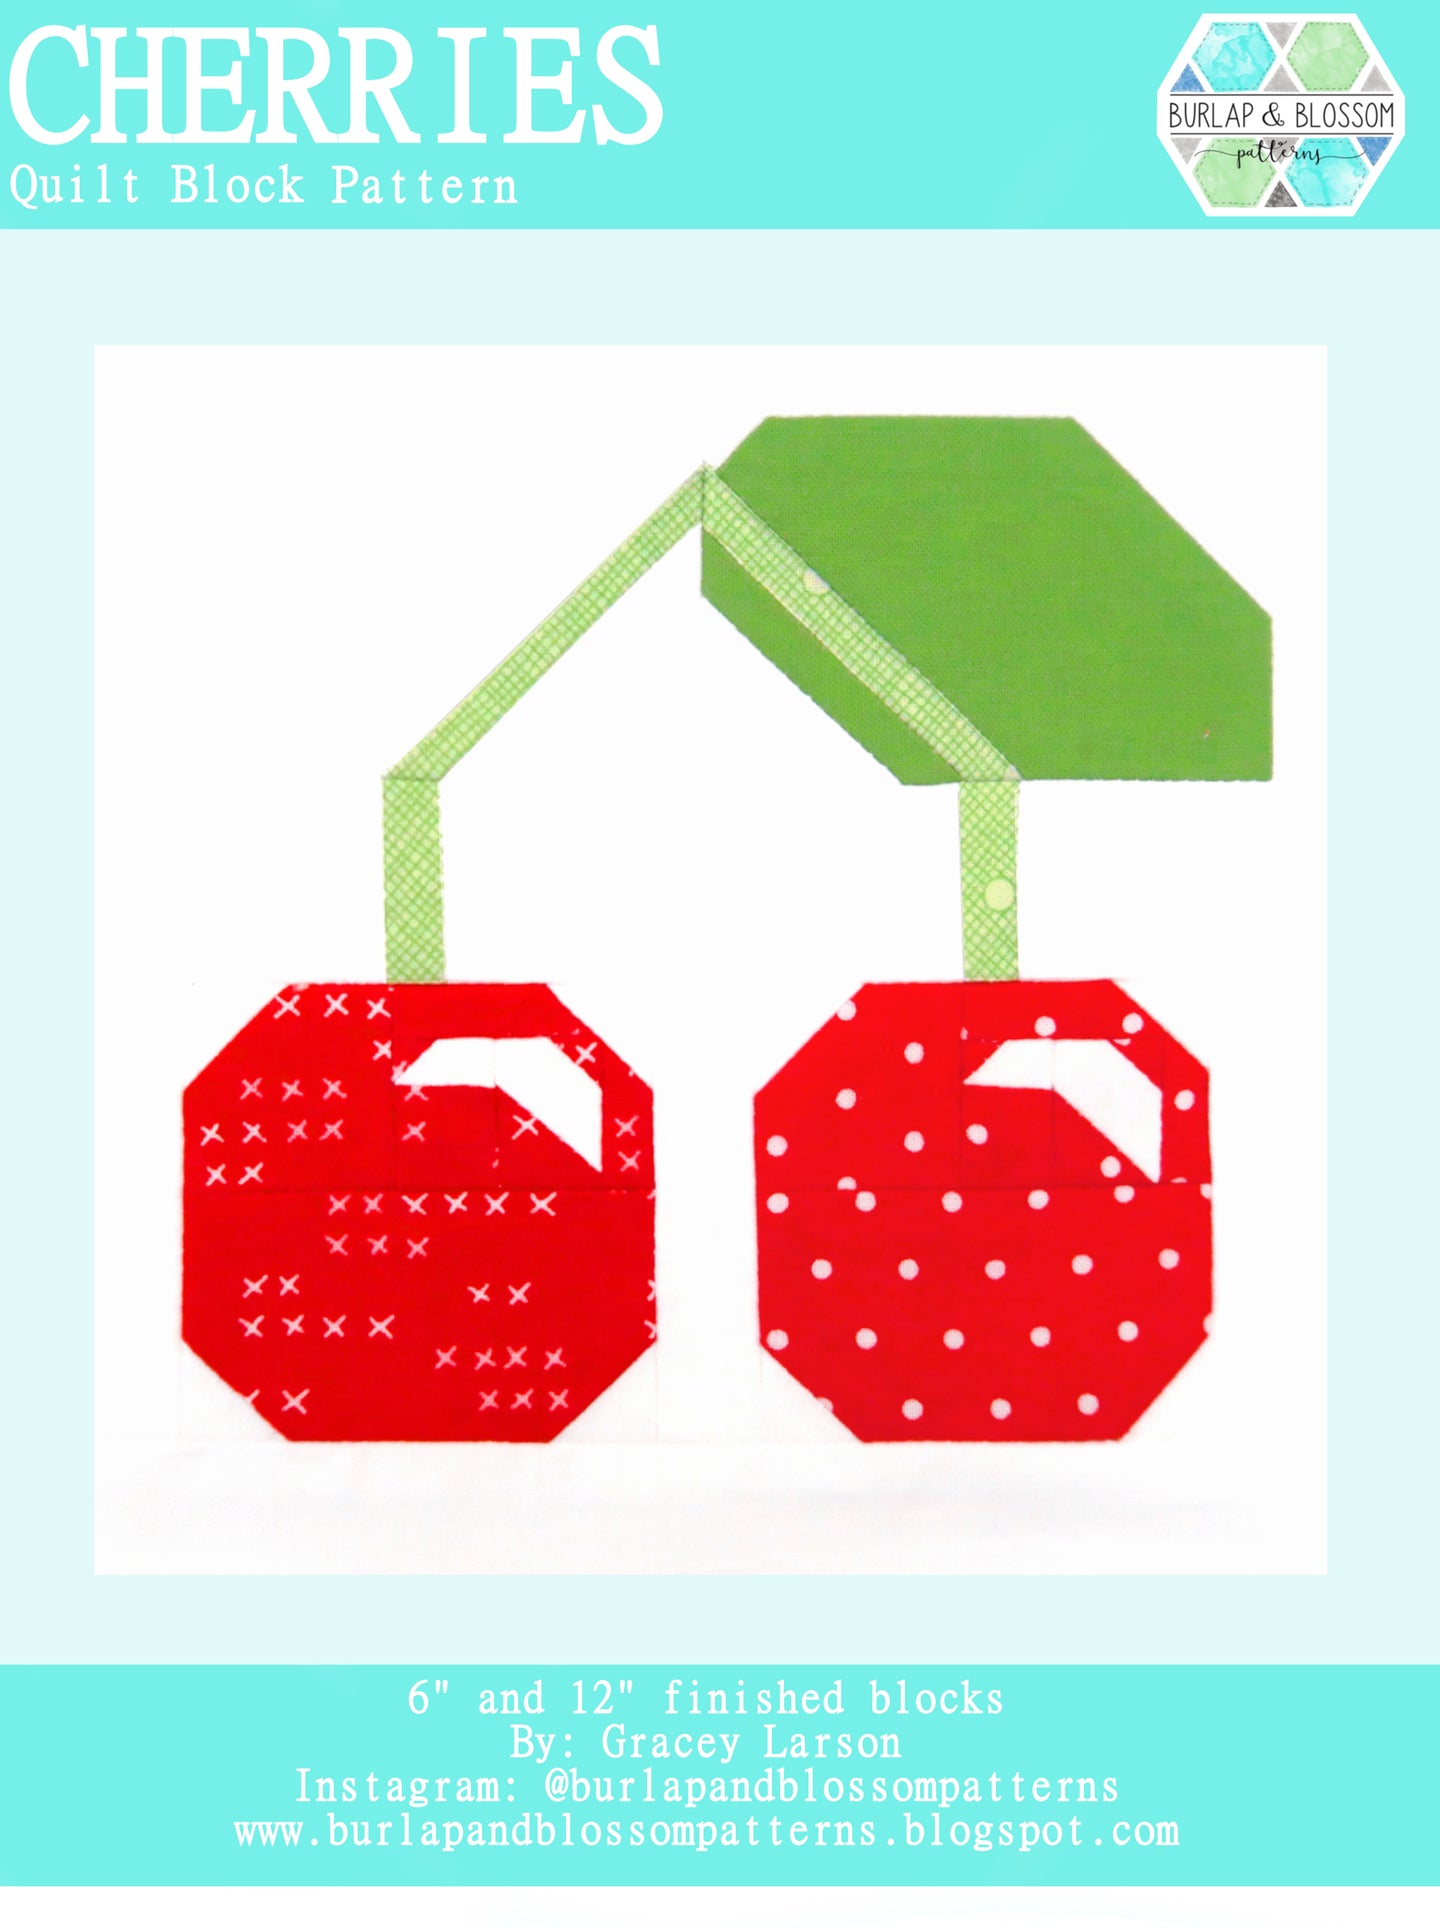 Pattern, Cherries Quilt Block by Burlap and Blossom (digital download)